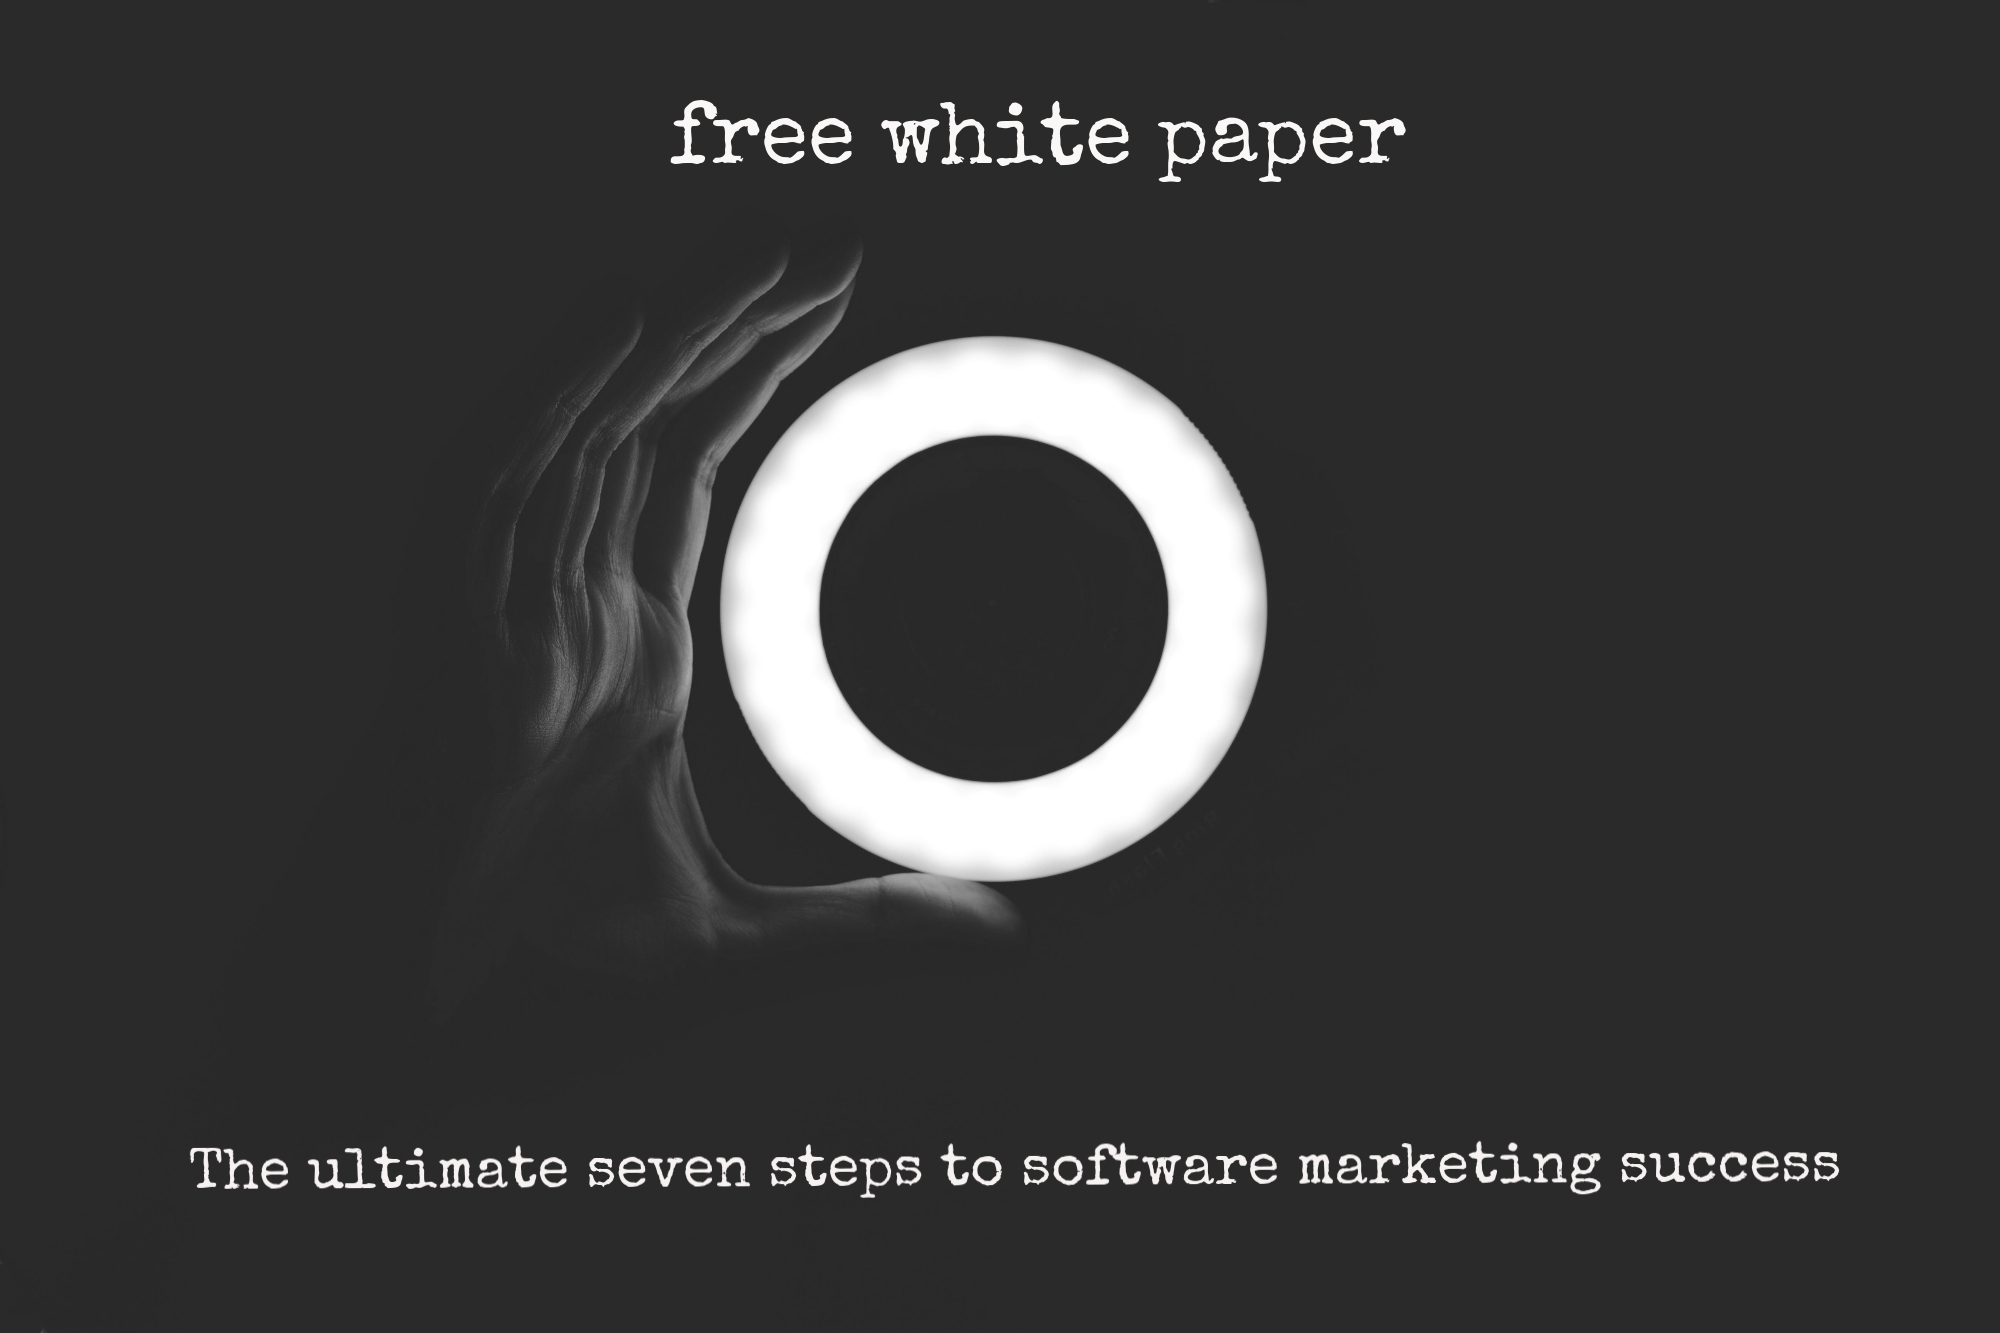 The ultimate seven steps to software marketing success